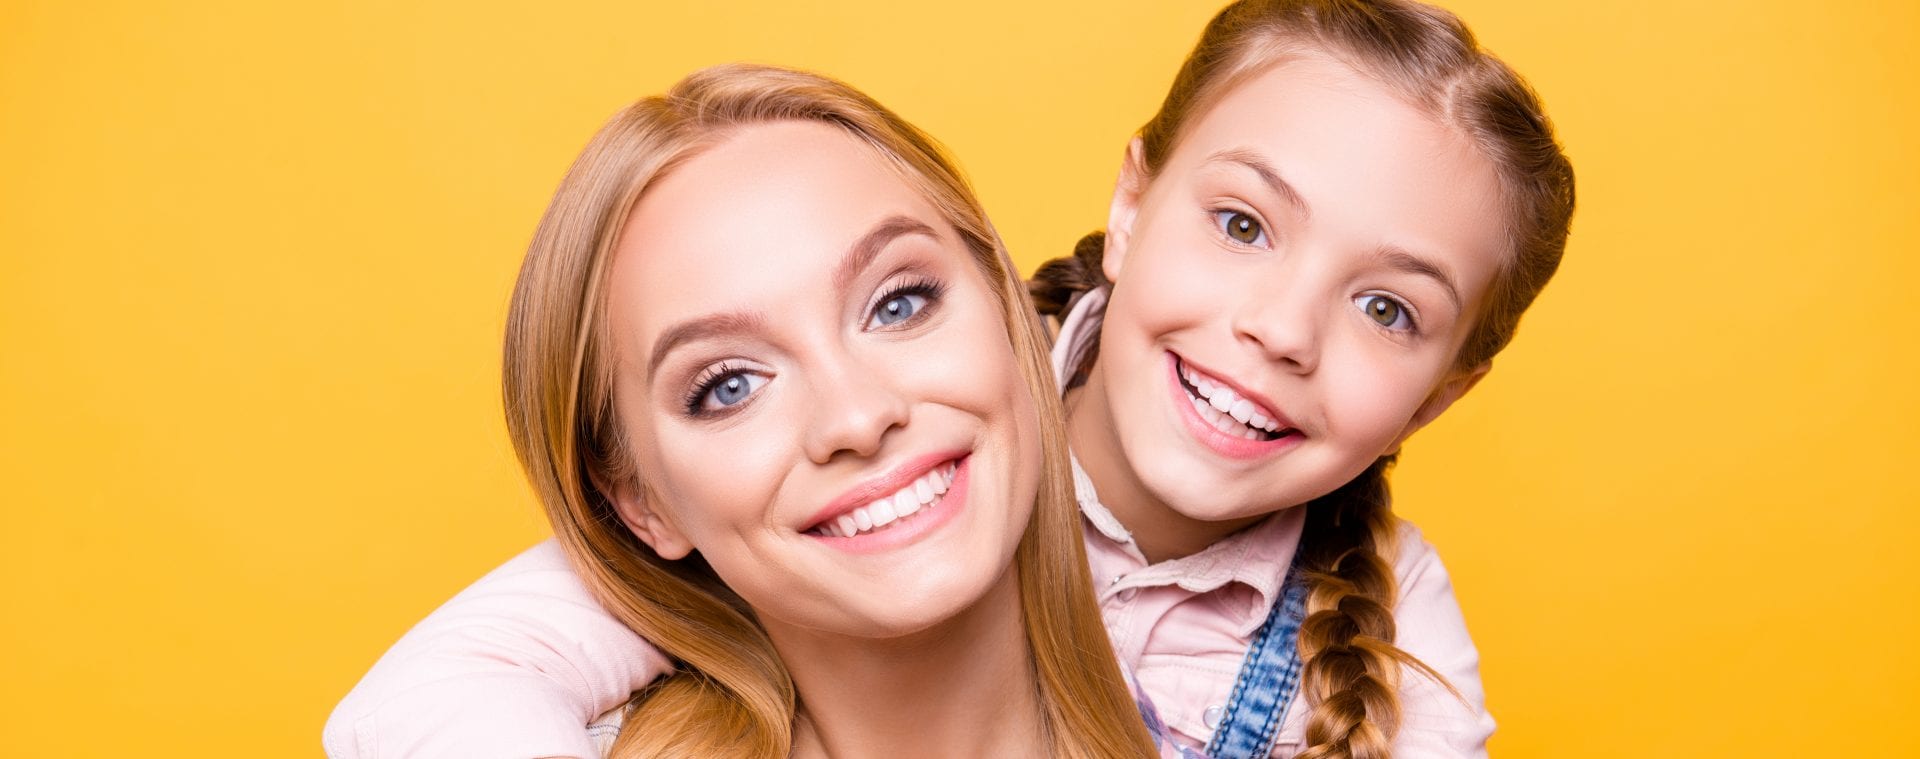 orthodontics for children and teens | Crane & Seager Orthodontics in Fort Collins and Loveland, CO